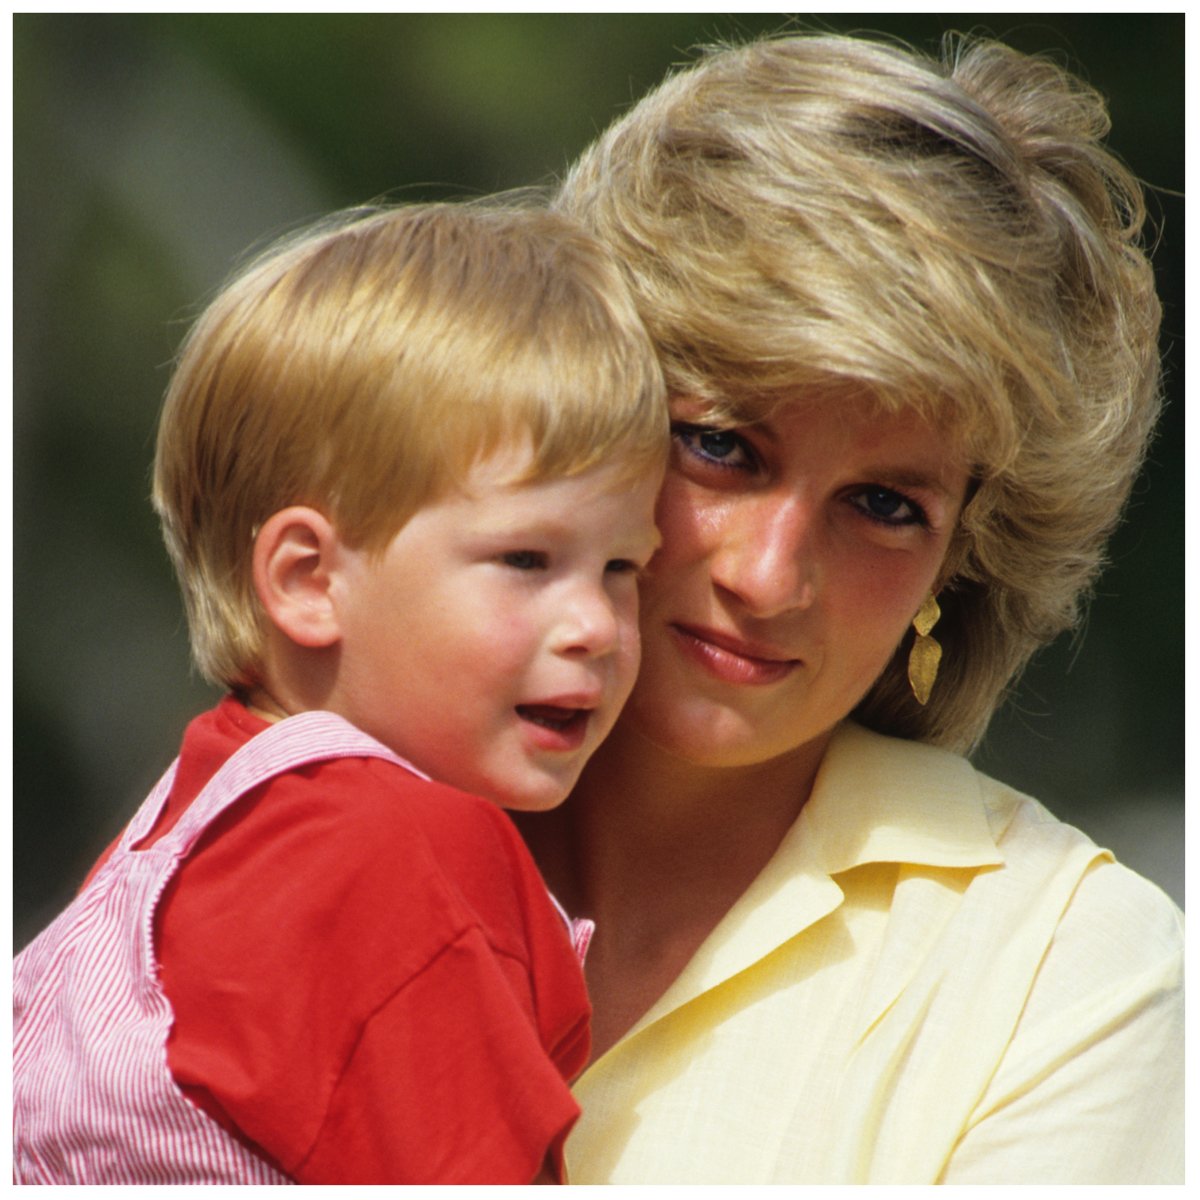 A photo of Princess Diana holding a young Prince Harry.